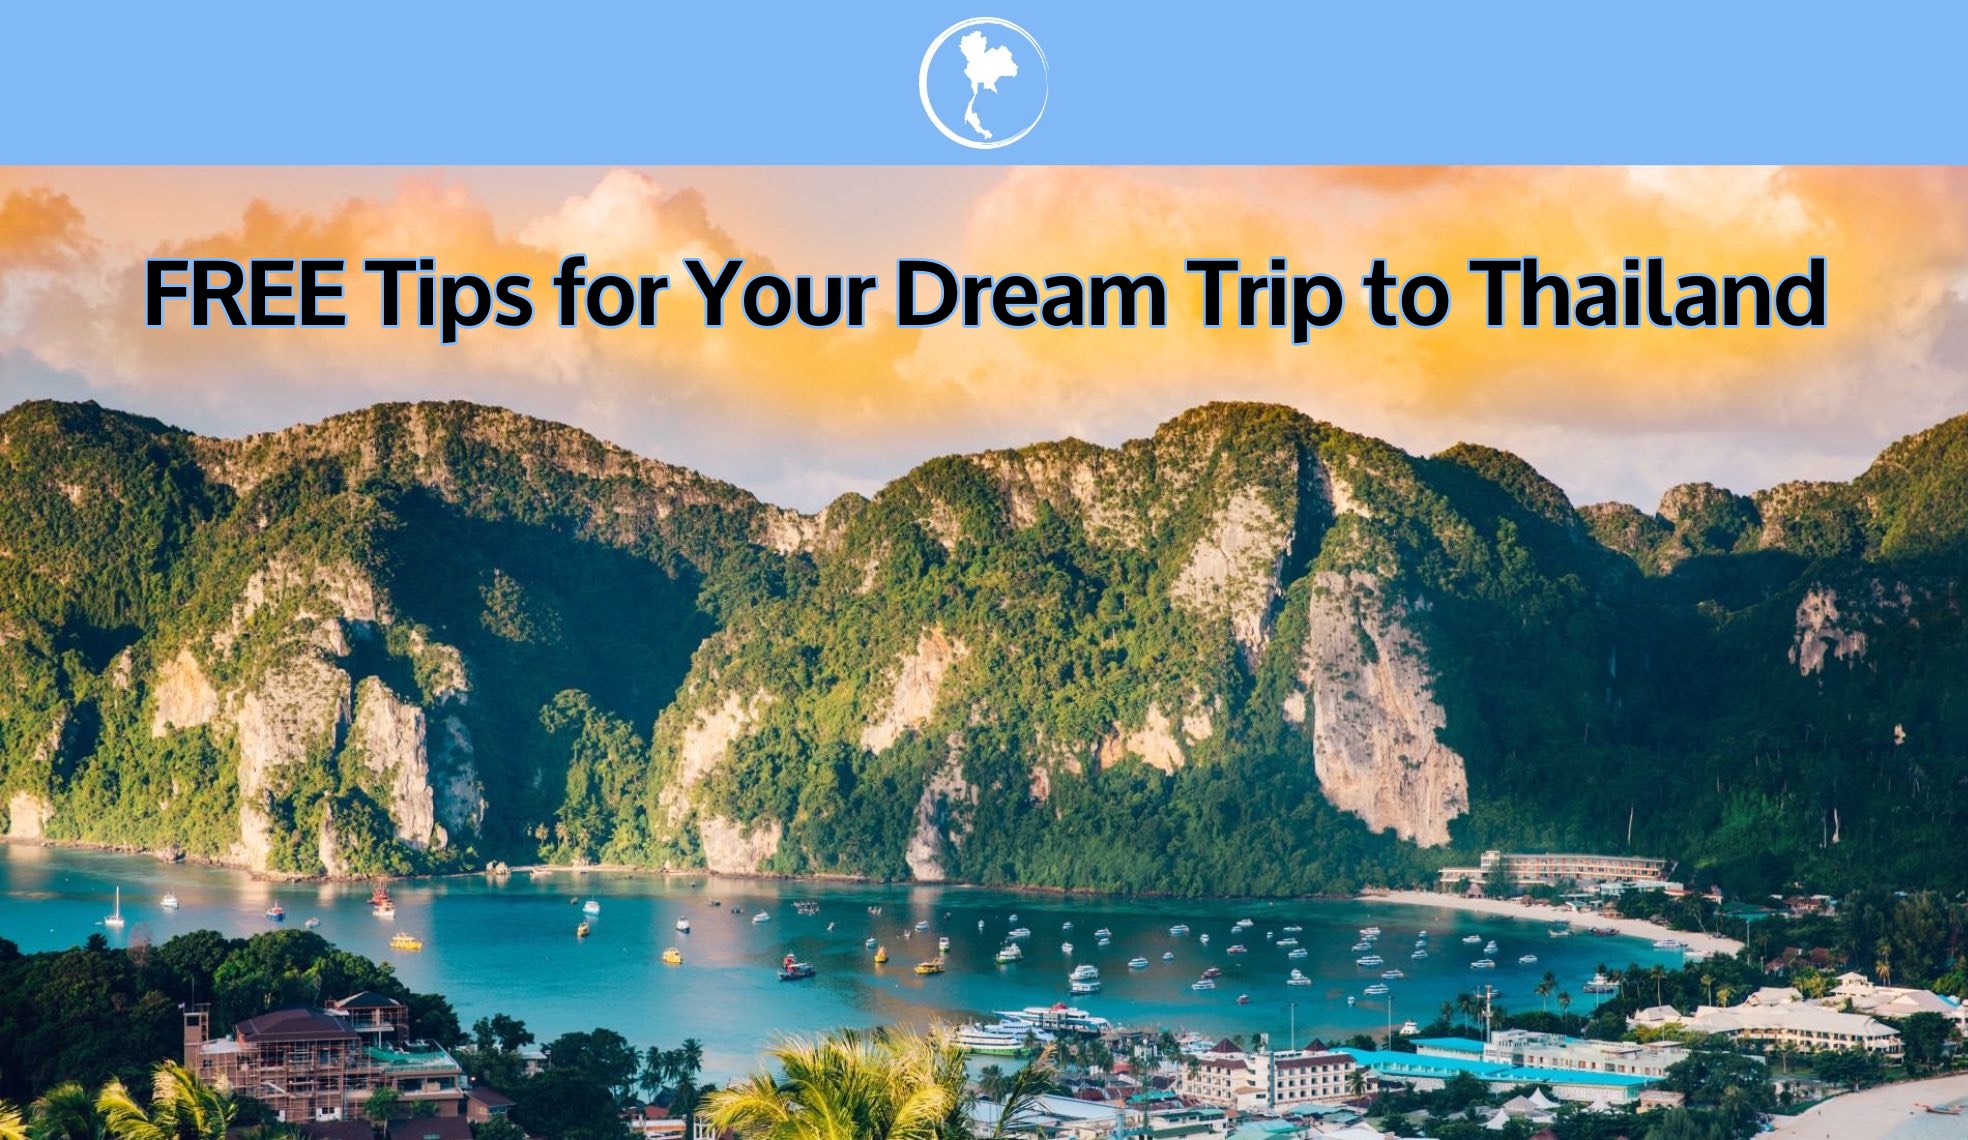 On the 'Travel to Thailand Tips' website, visitors get free tips for planning their trip to Thailand. This travel blog provides valuable insights for a seamless and memorable travel experience in Thailand.